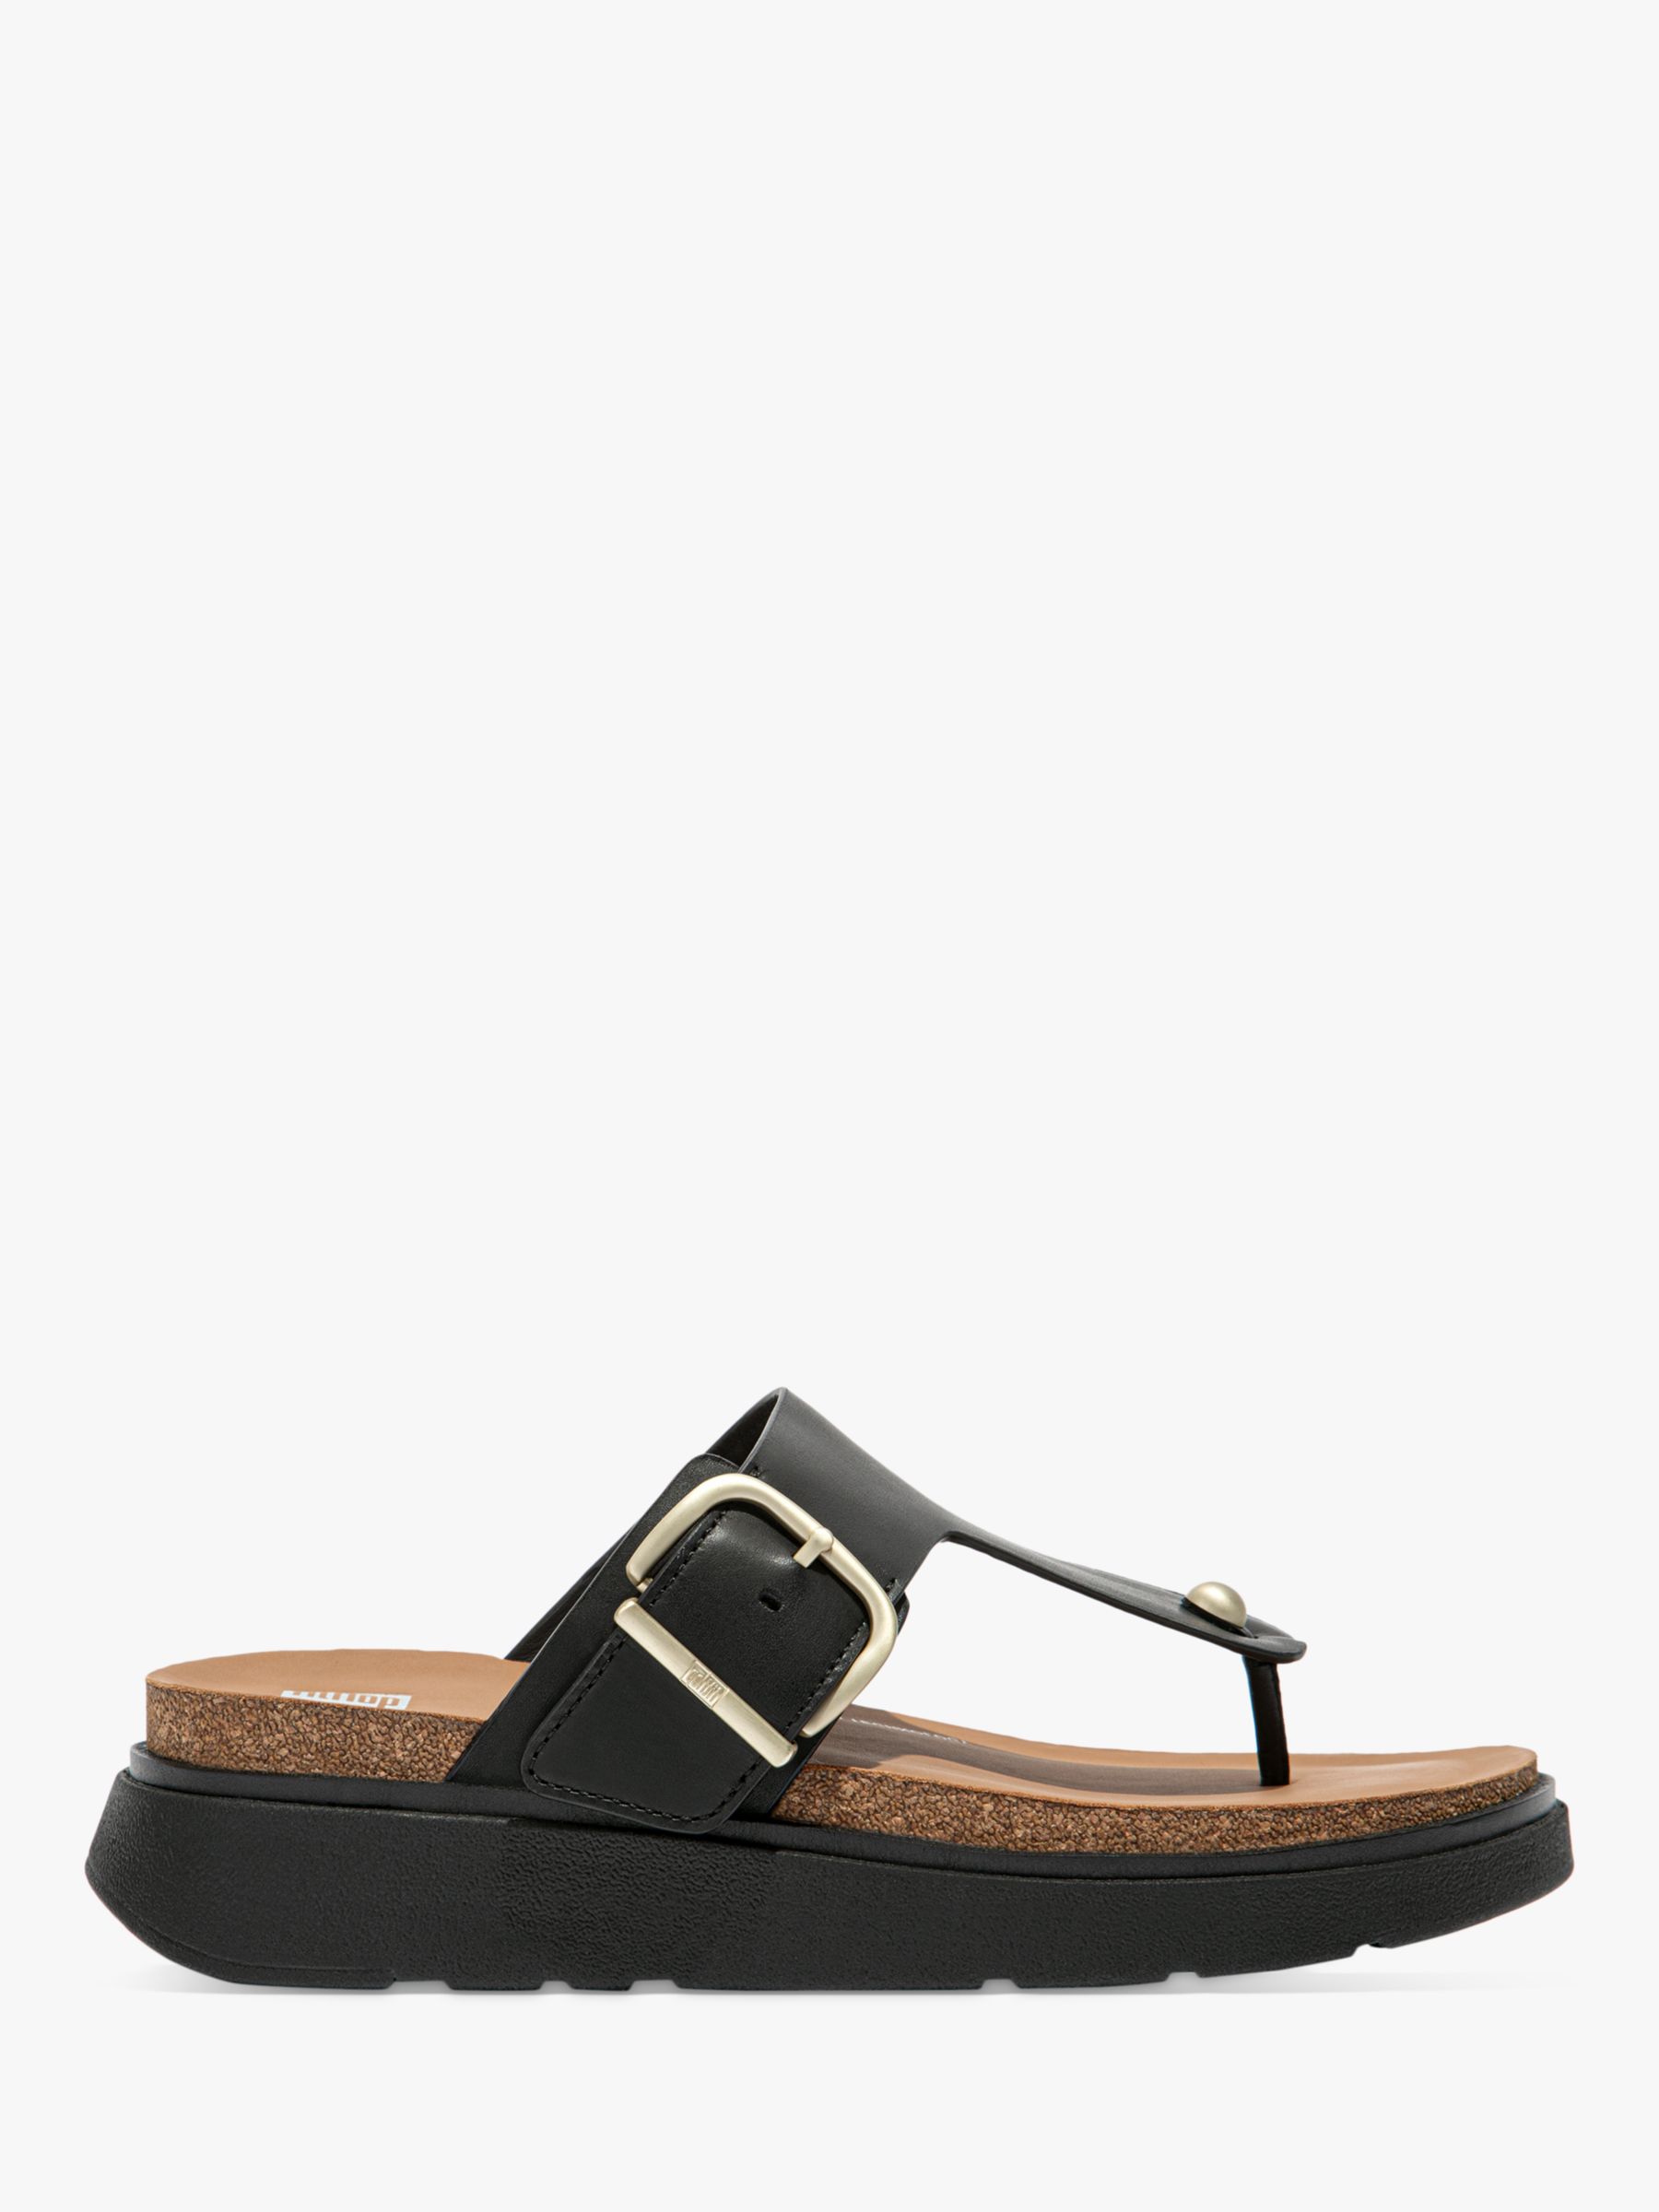 FitFlop Leather T-Bar Sandals, Black at John Lewis & Partners